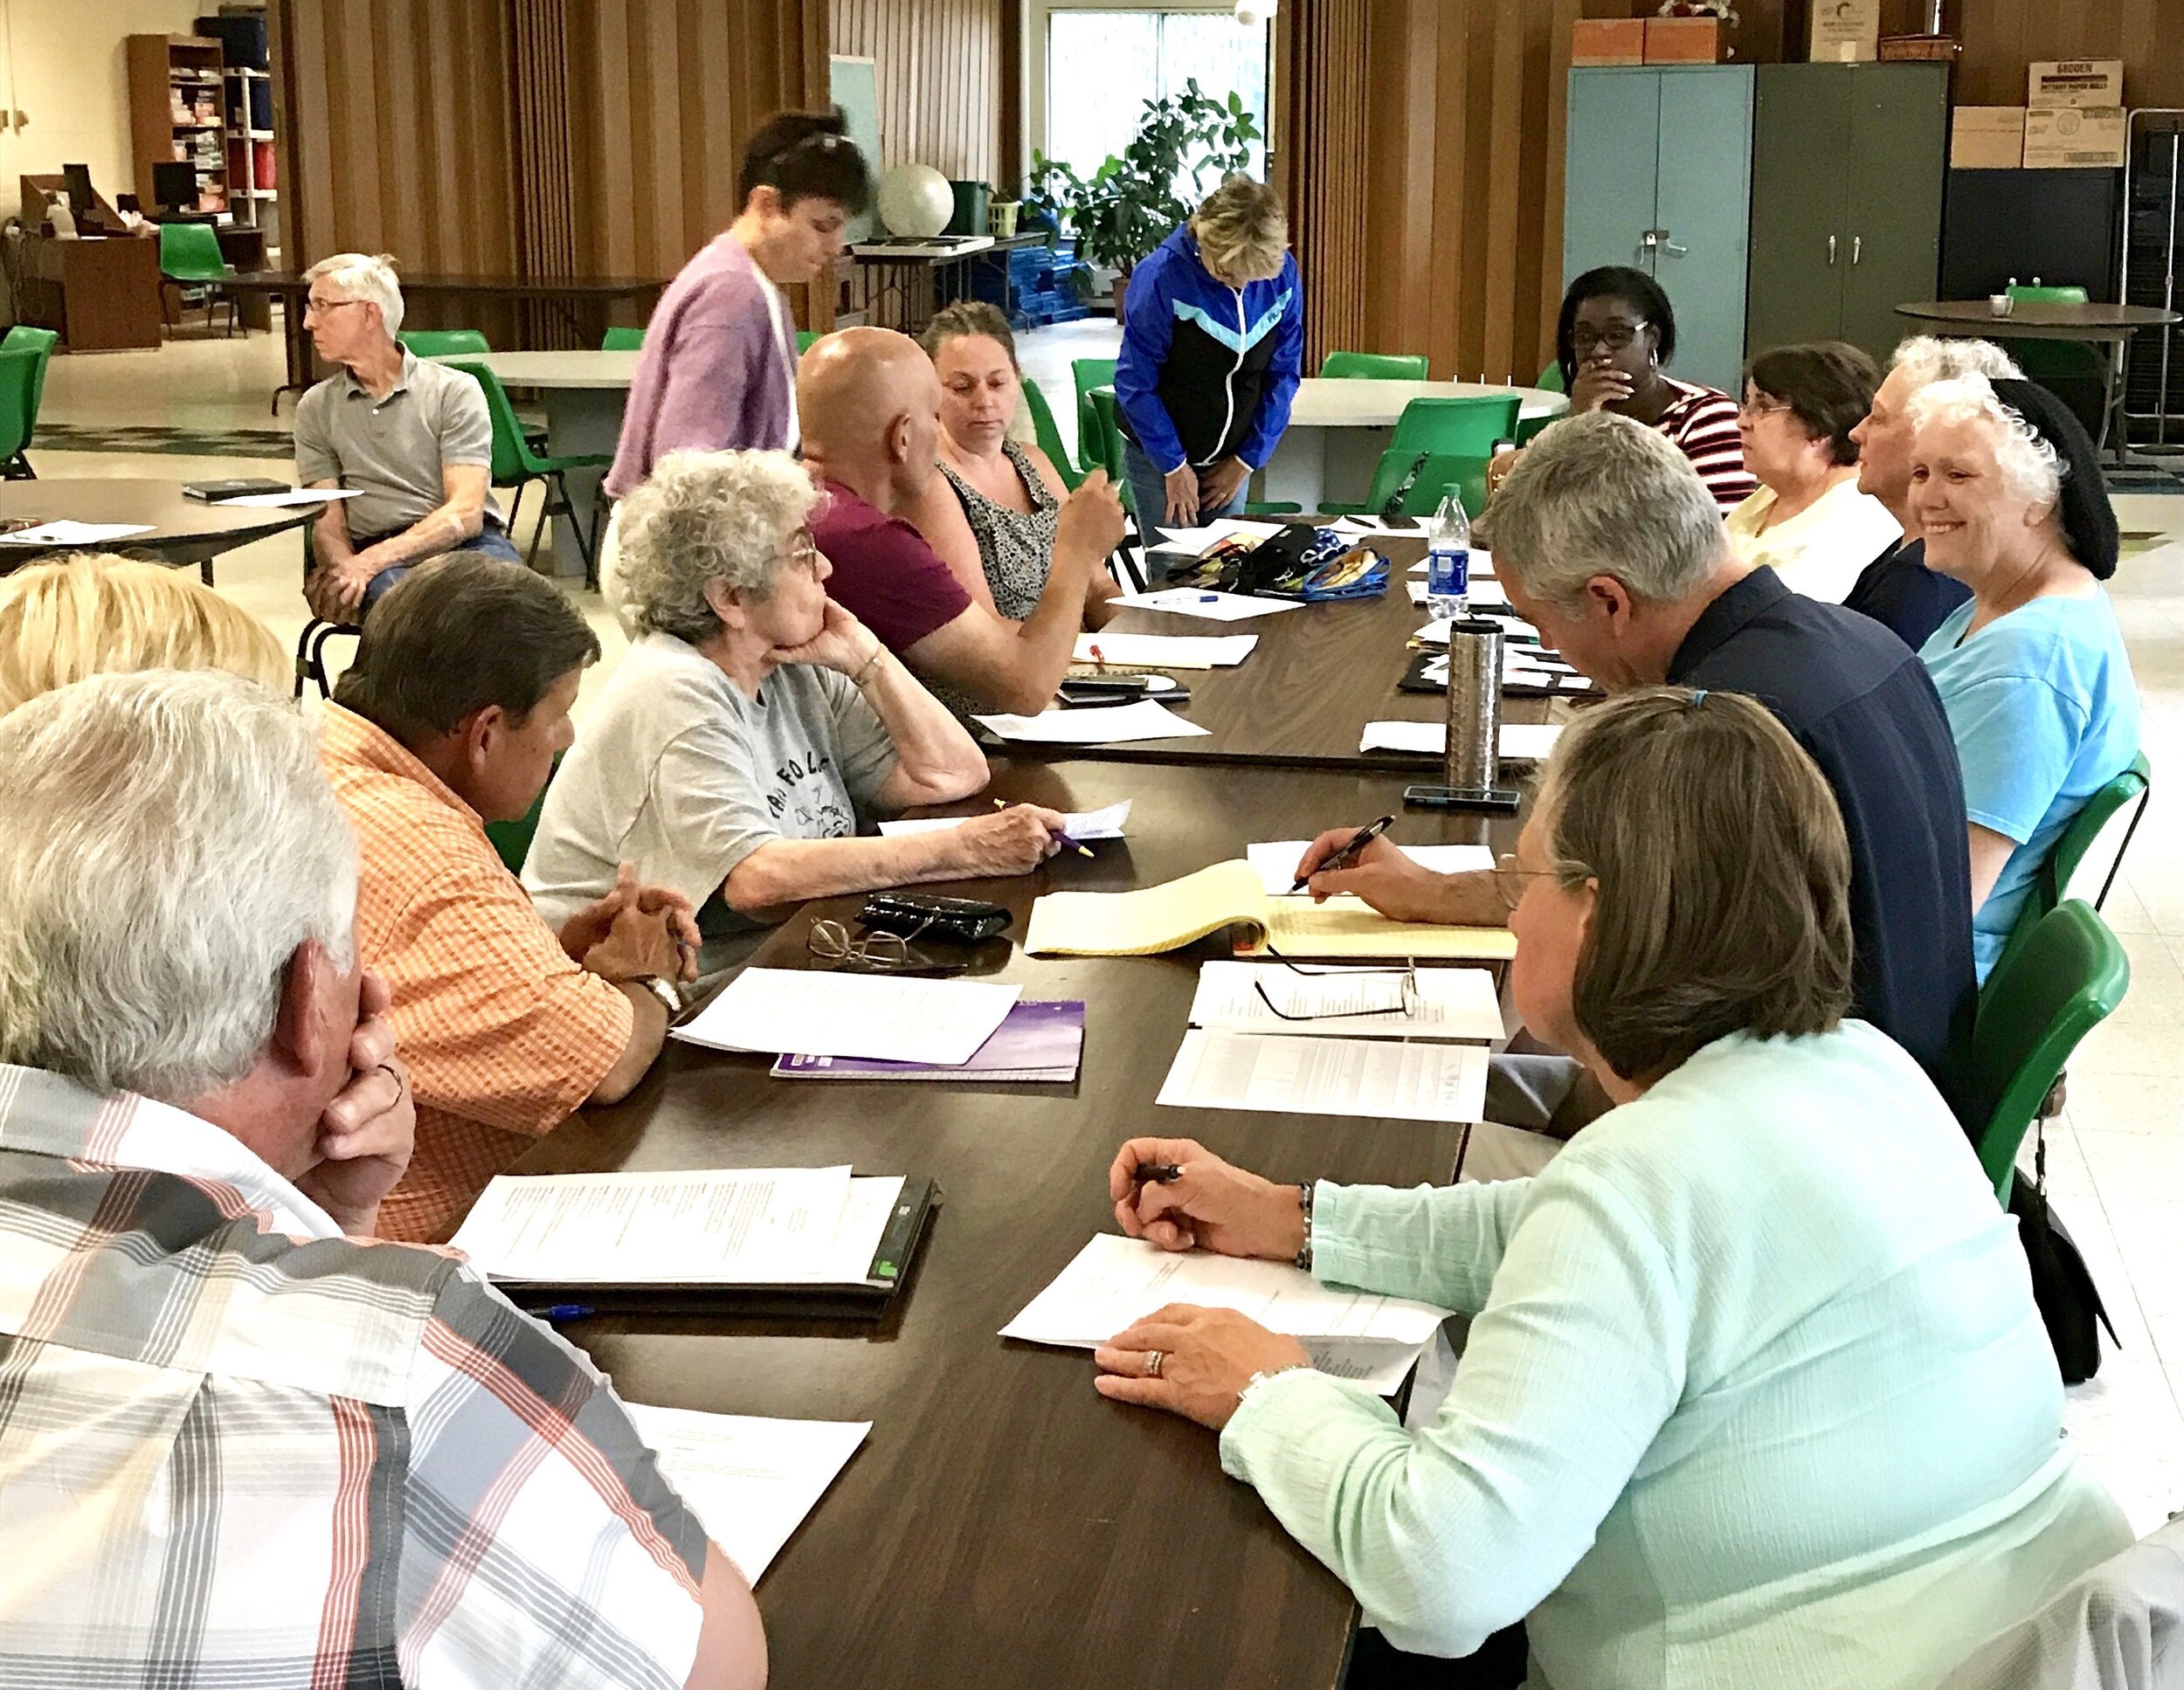 Committee meeting at the Richmond Summer Senior Center